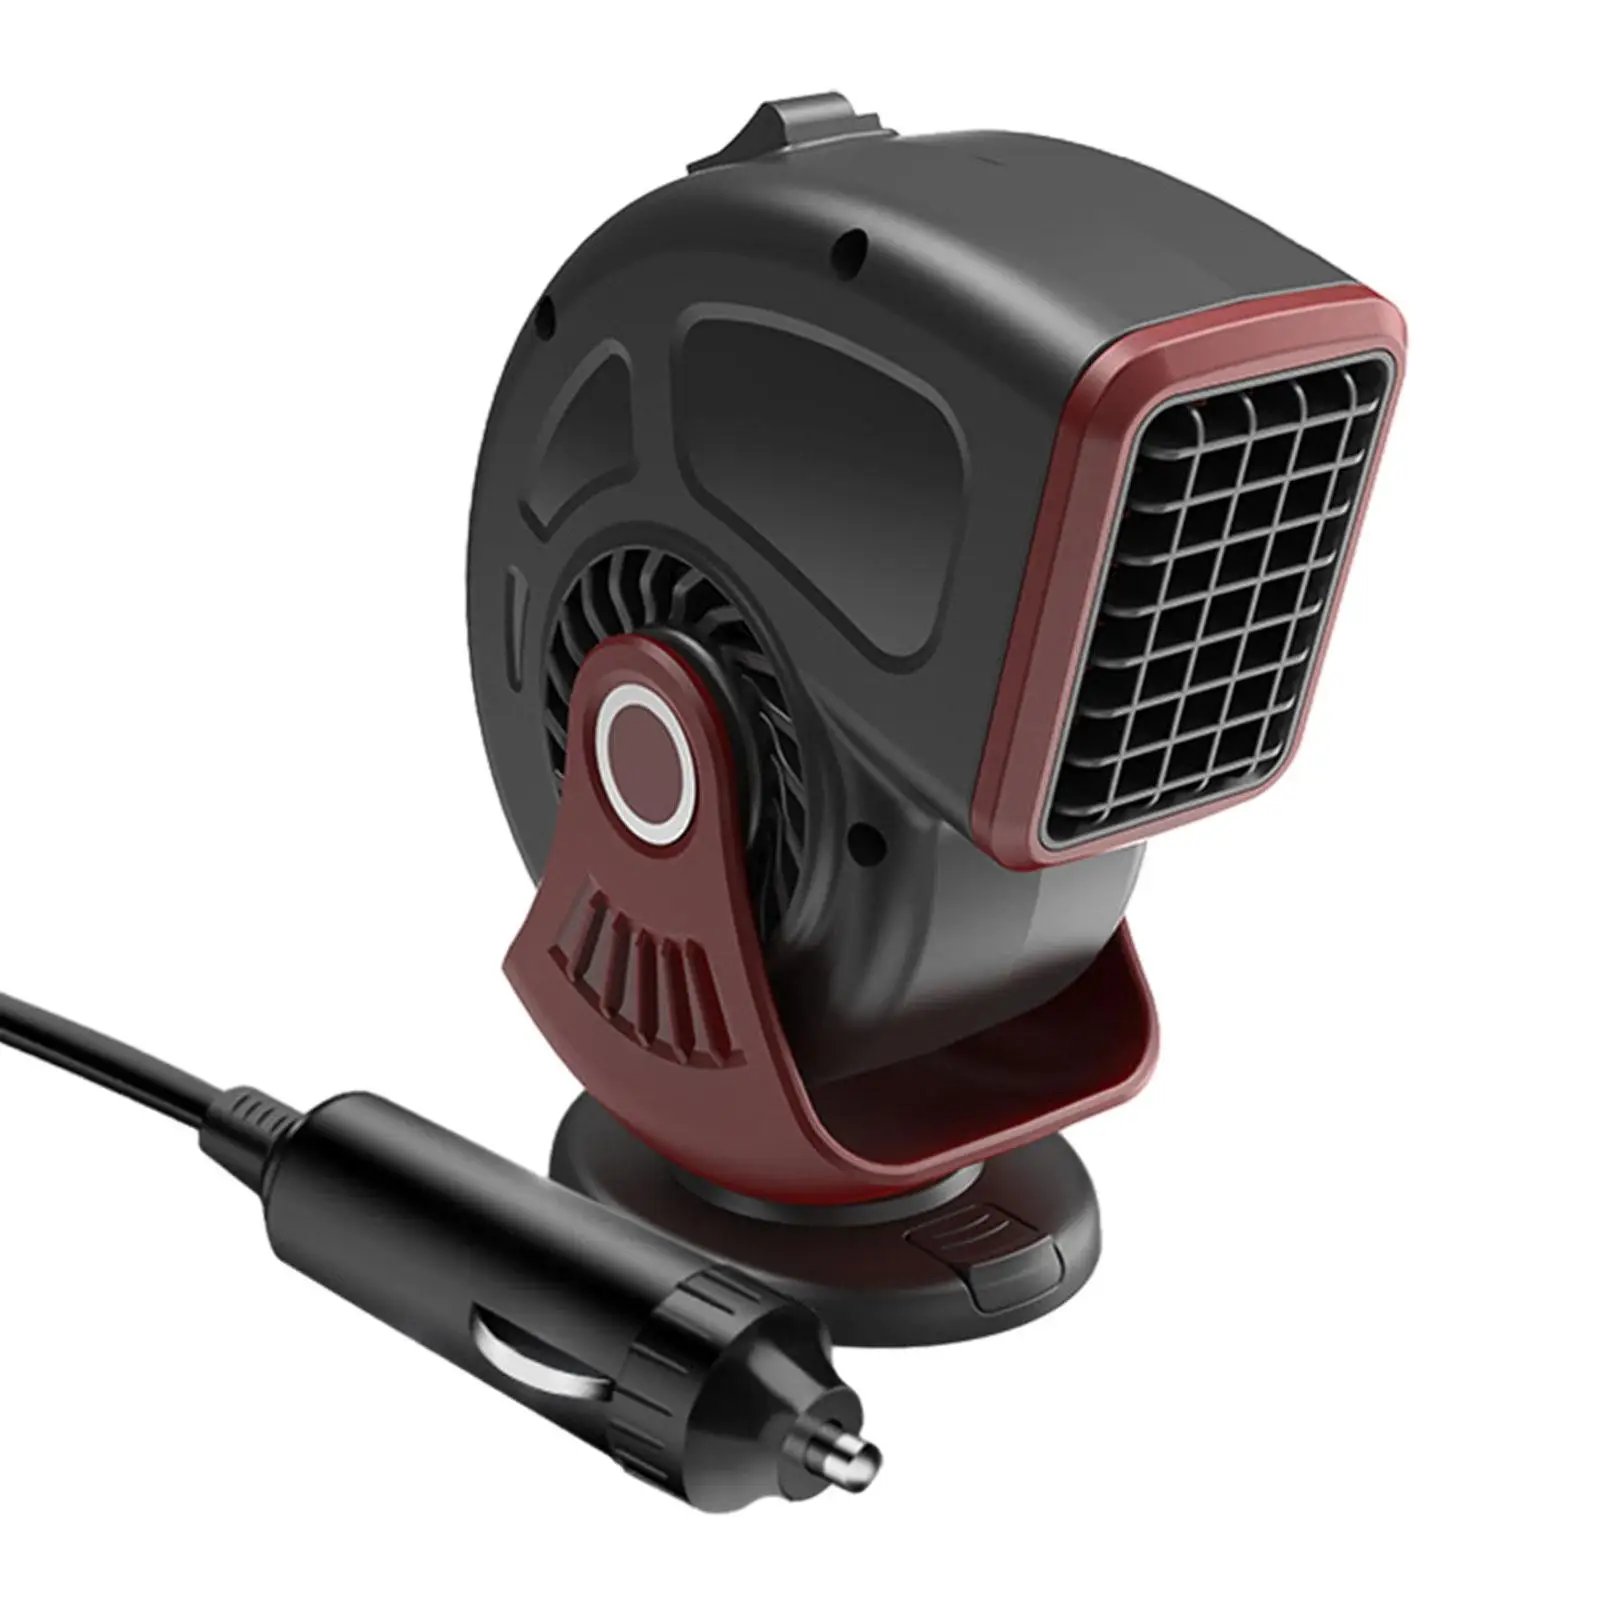 12V Car Heater 120W 2 in 1 Rotatable Portable Fast Heating Defrost Defogger Automobile Windscreen Fan Auto Vehicle Heater